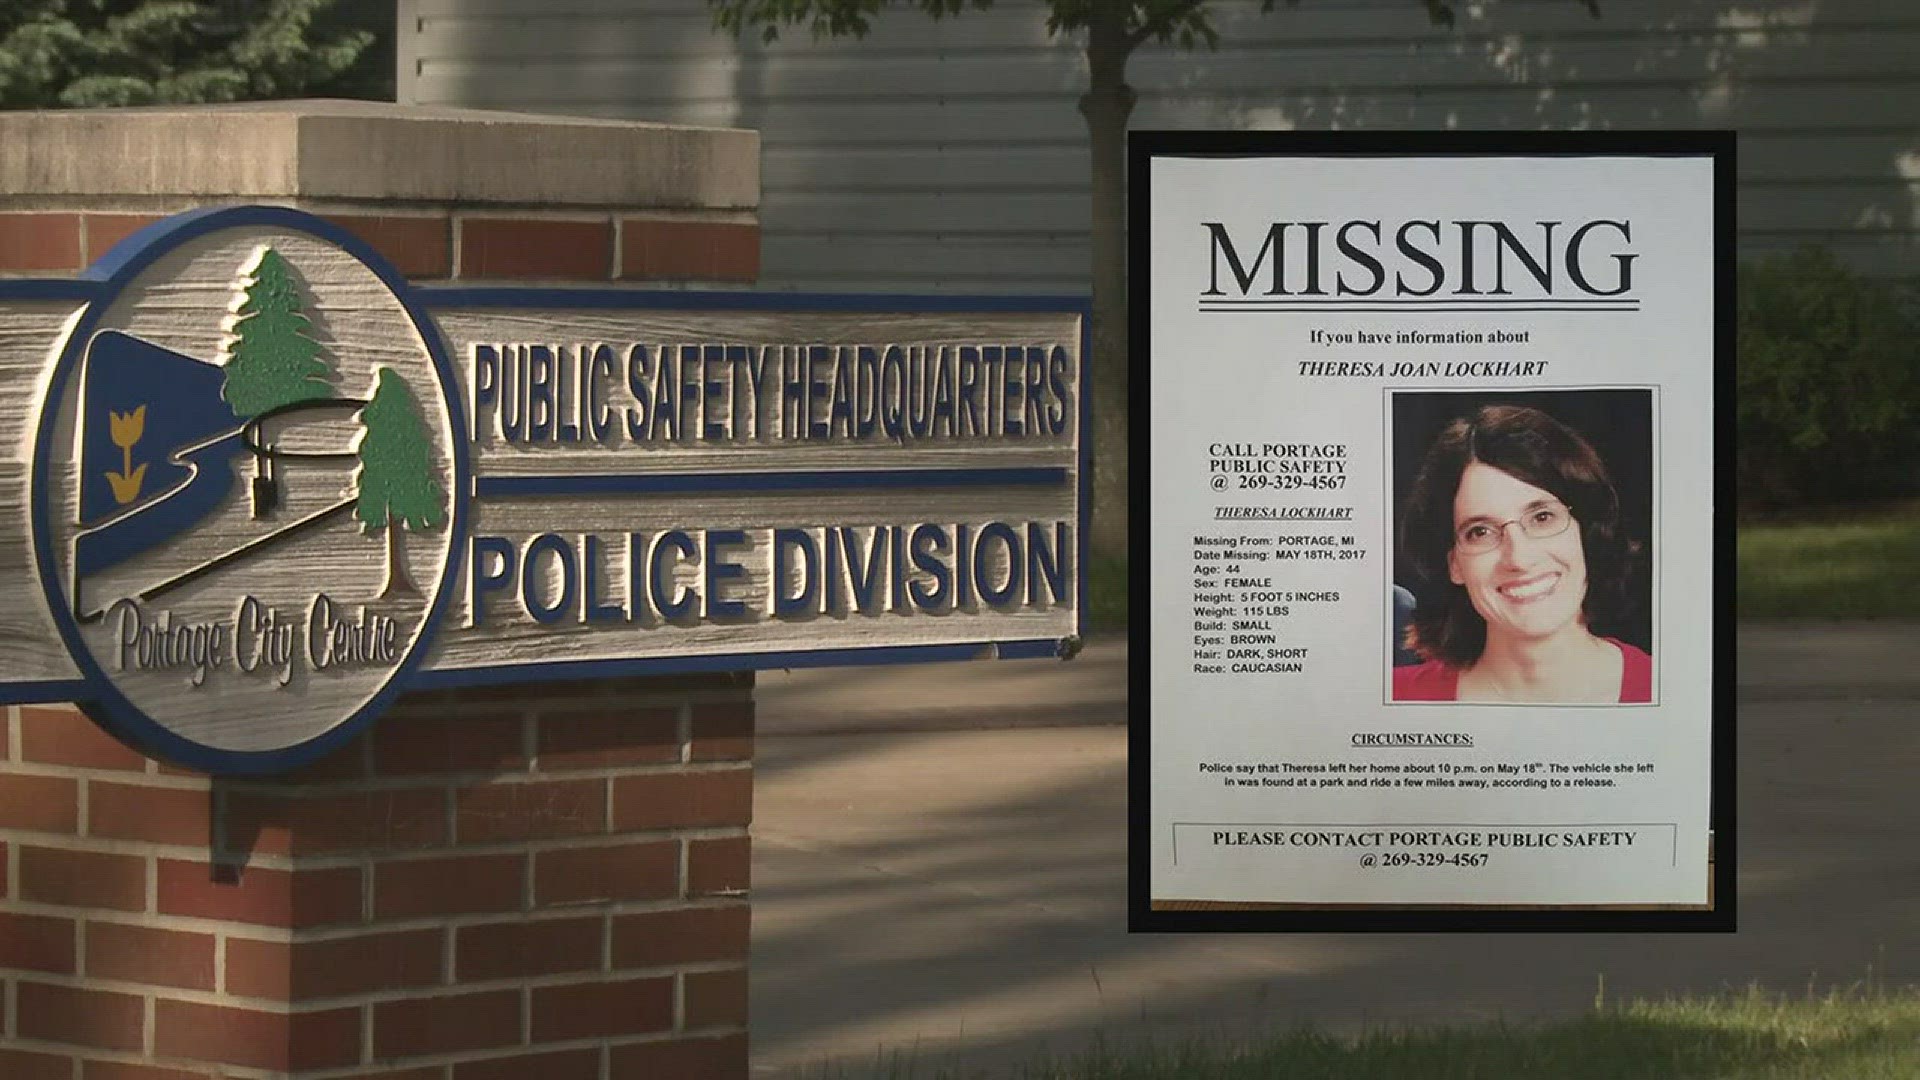 They were going through a rough patch, friend of missing Portage woman speaks wzzm13 image